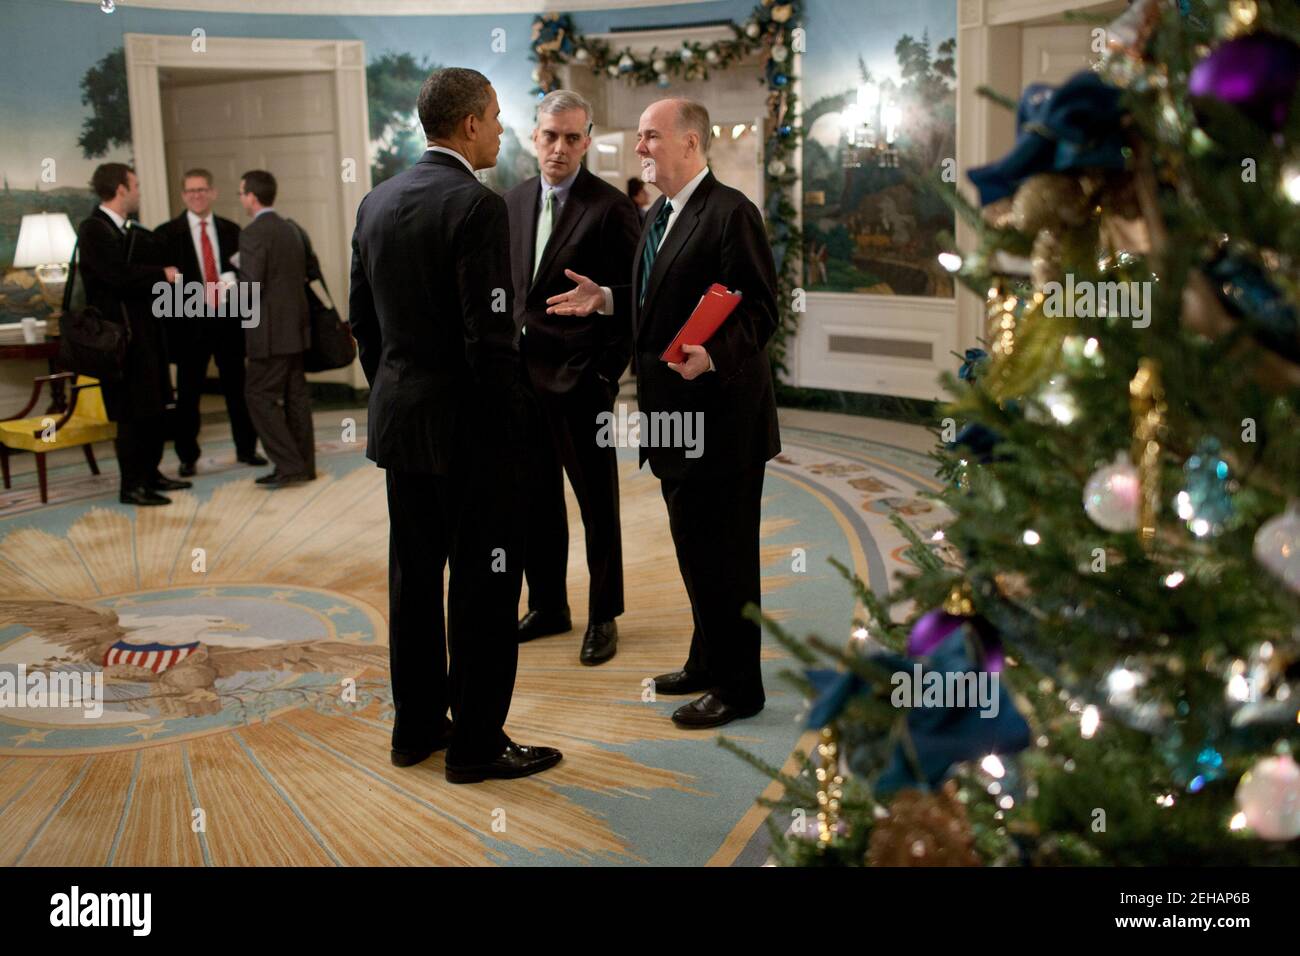 President Barack Obama talks with Deputy National Security Advisor Denis McDonough and National Security Advisor Tom Donilon in the Diplomatic Reception Room of the White House, before departing for Osawatomie, Kan., Dec. 6, 2011. Stock Photo